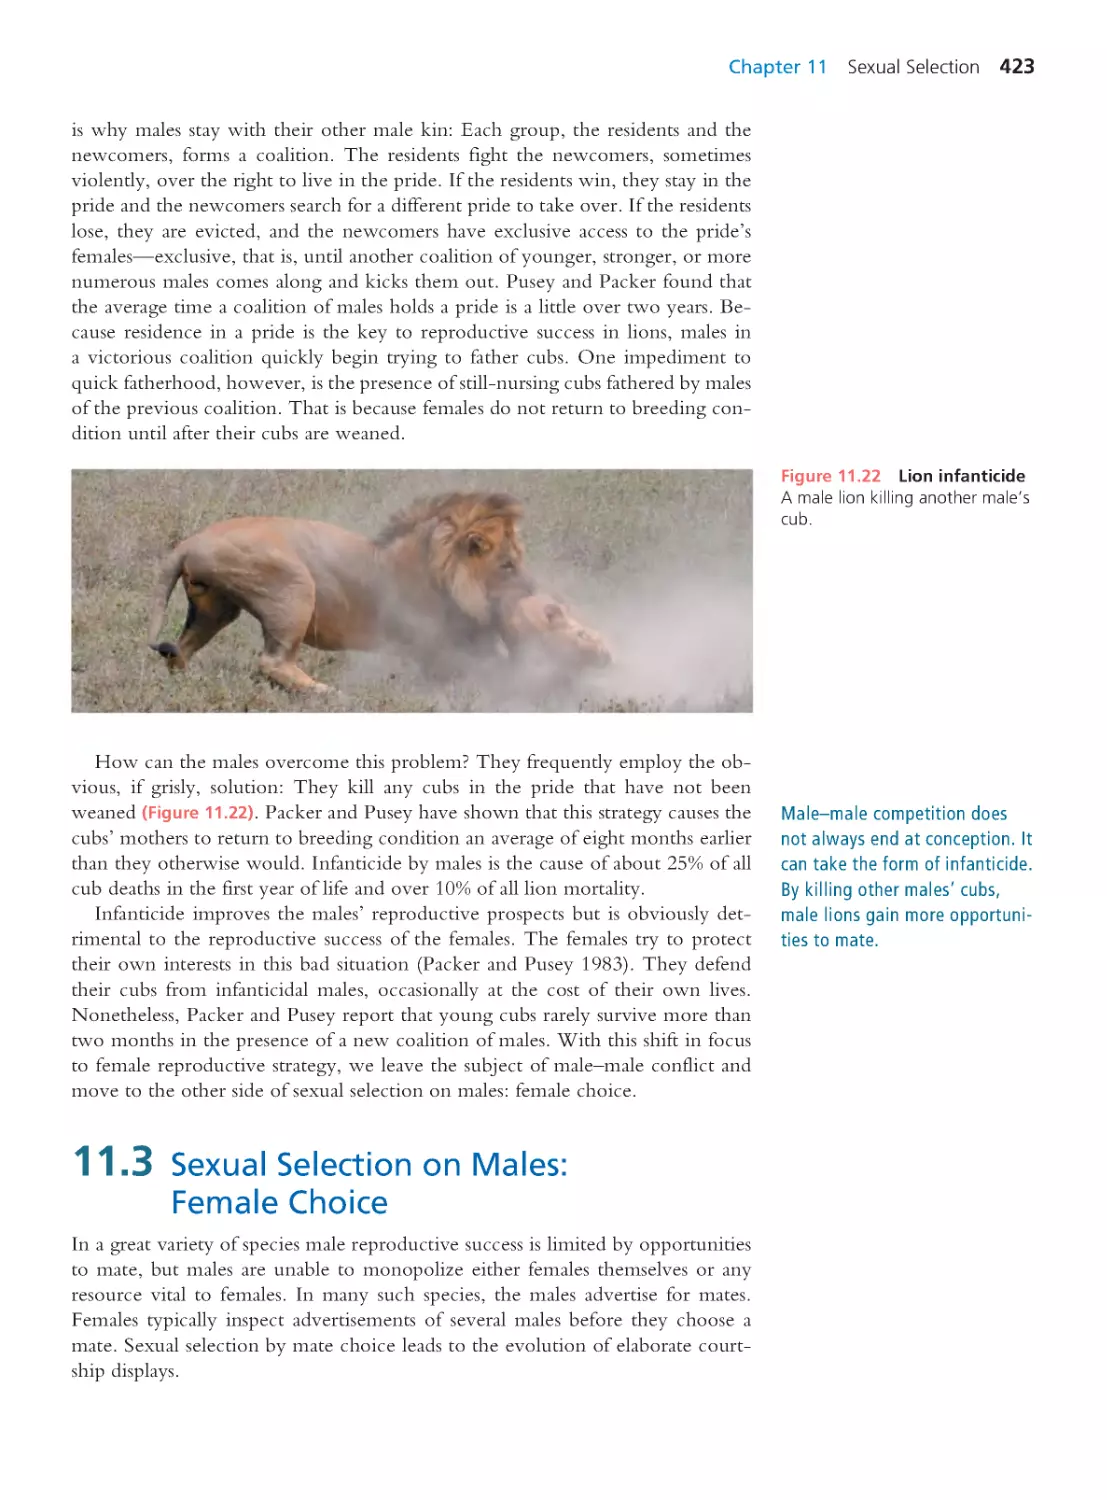 11.3 Sexual Selection on Males: Female Choice